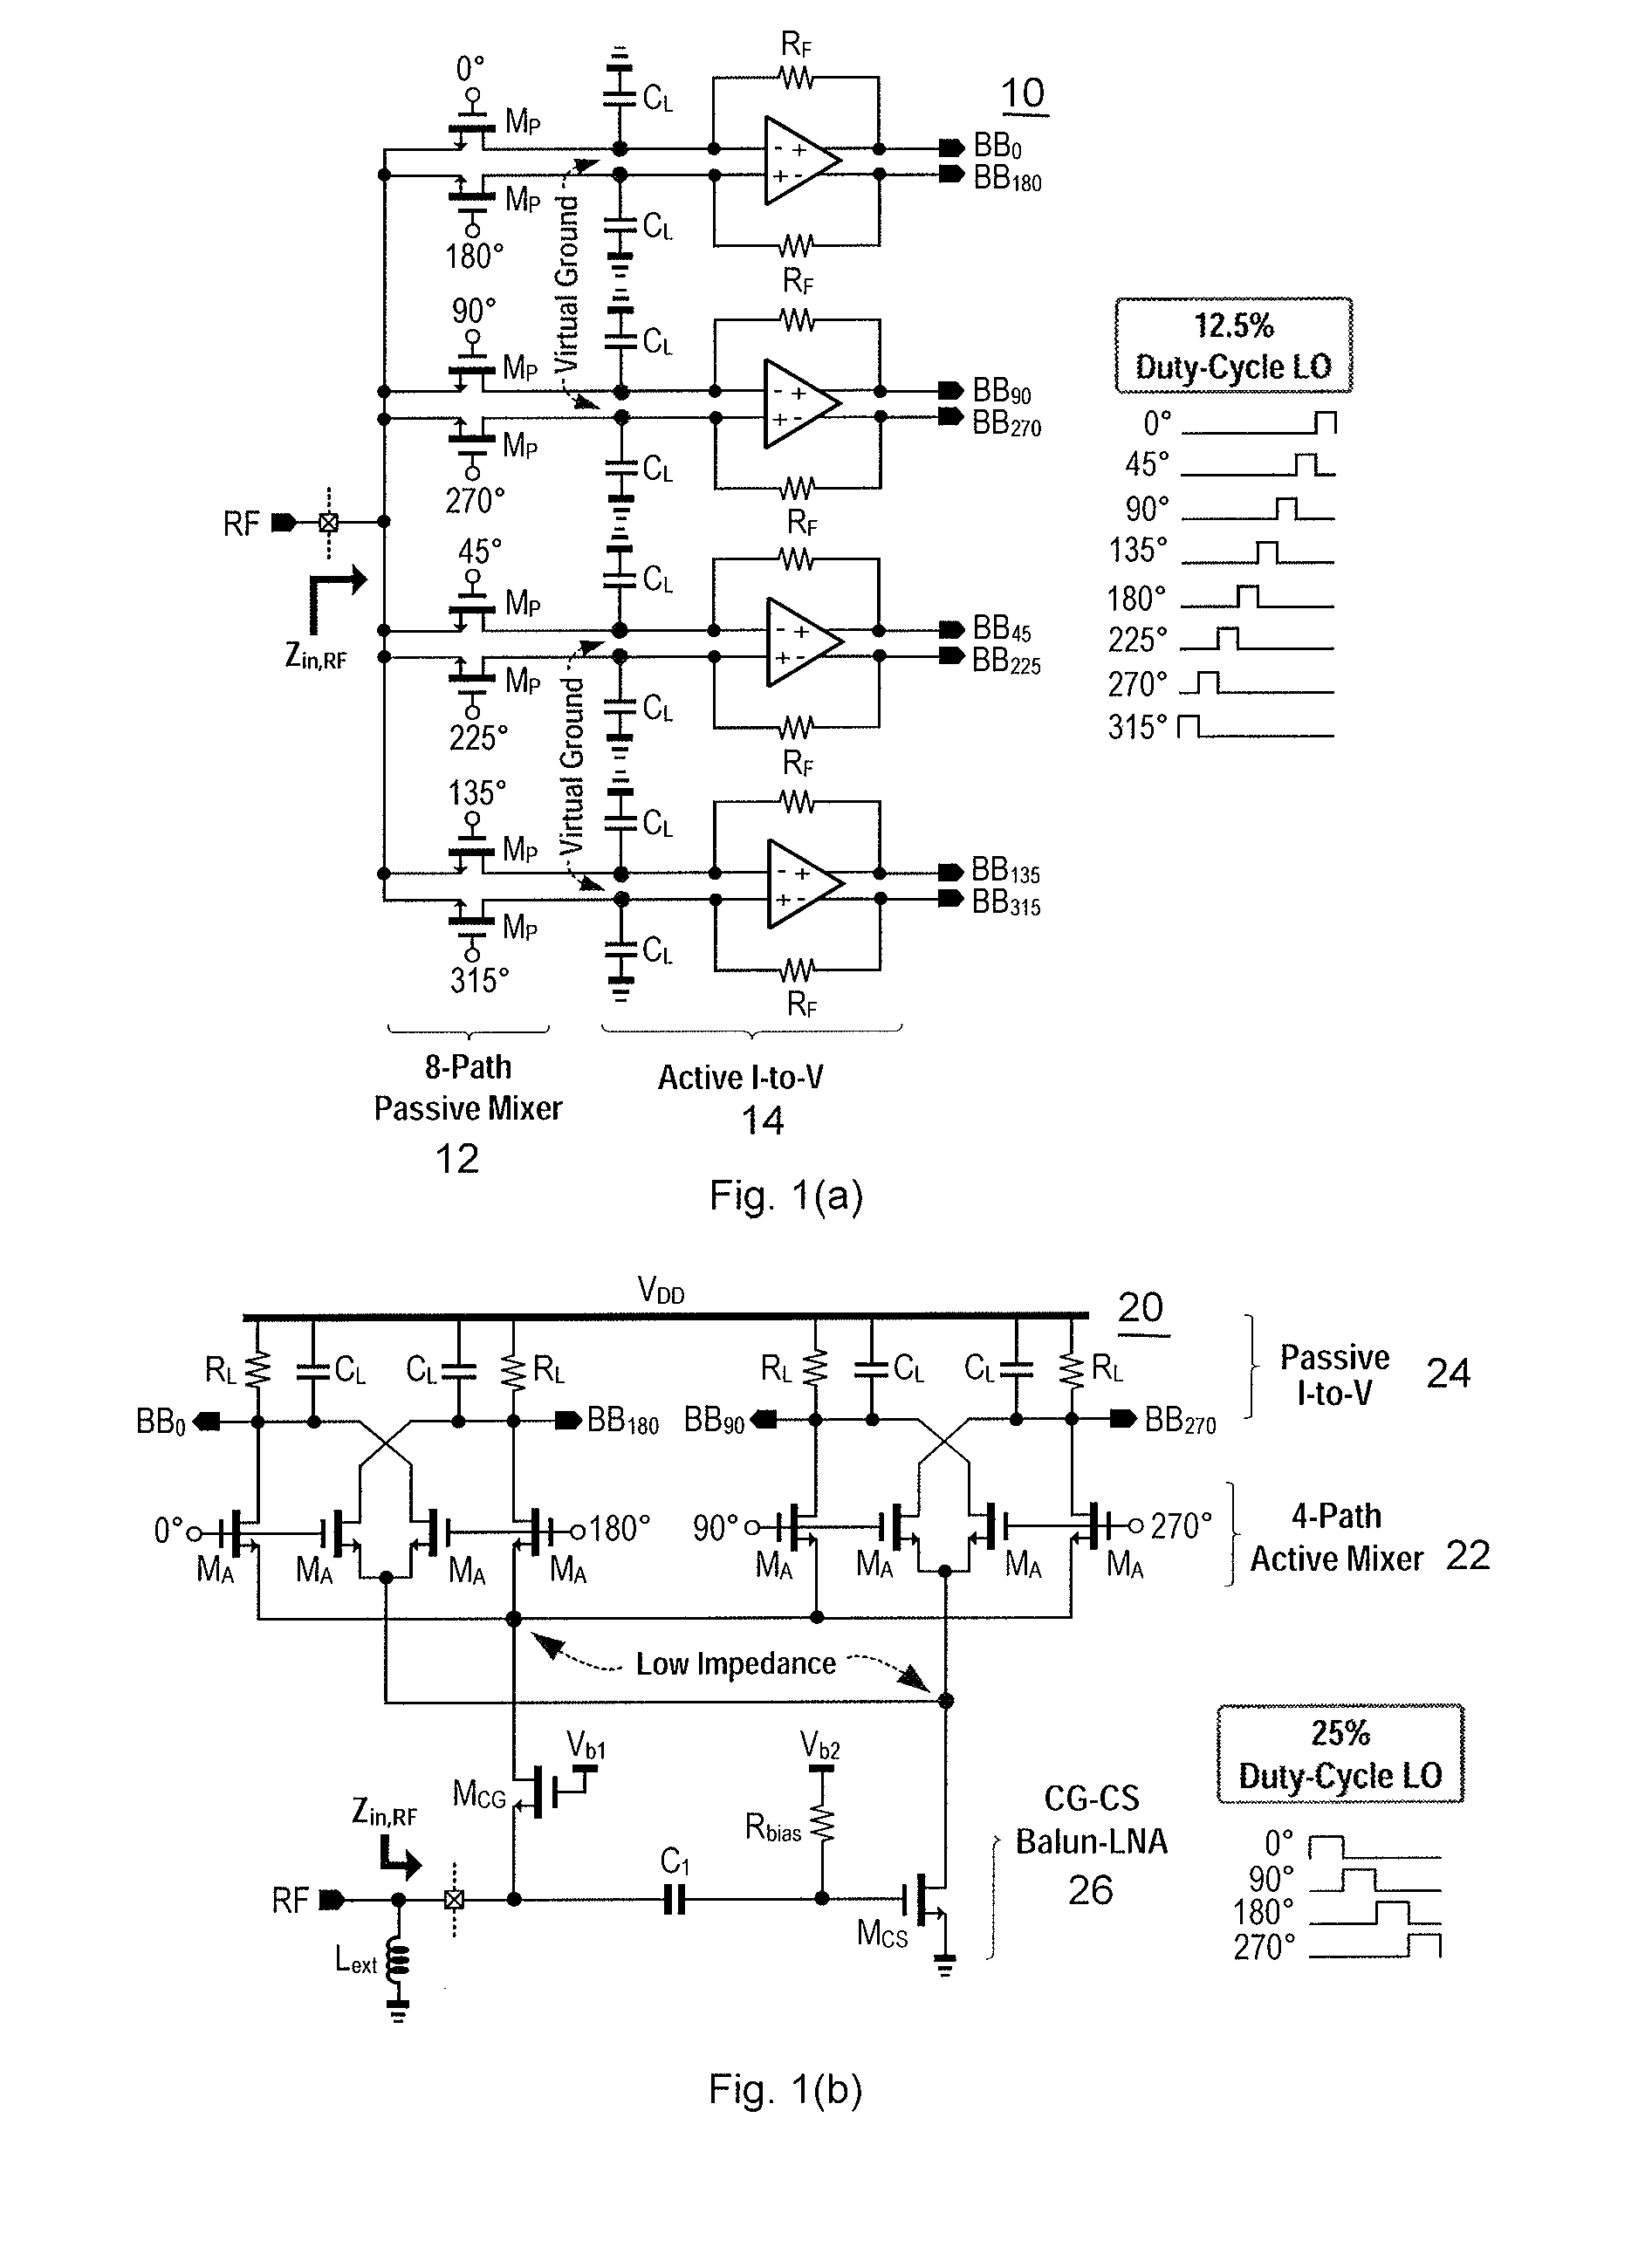 RF-to-BB-current-reuse wideband receiver with parallel N-path active/passive mixers